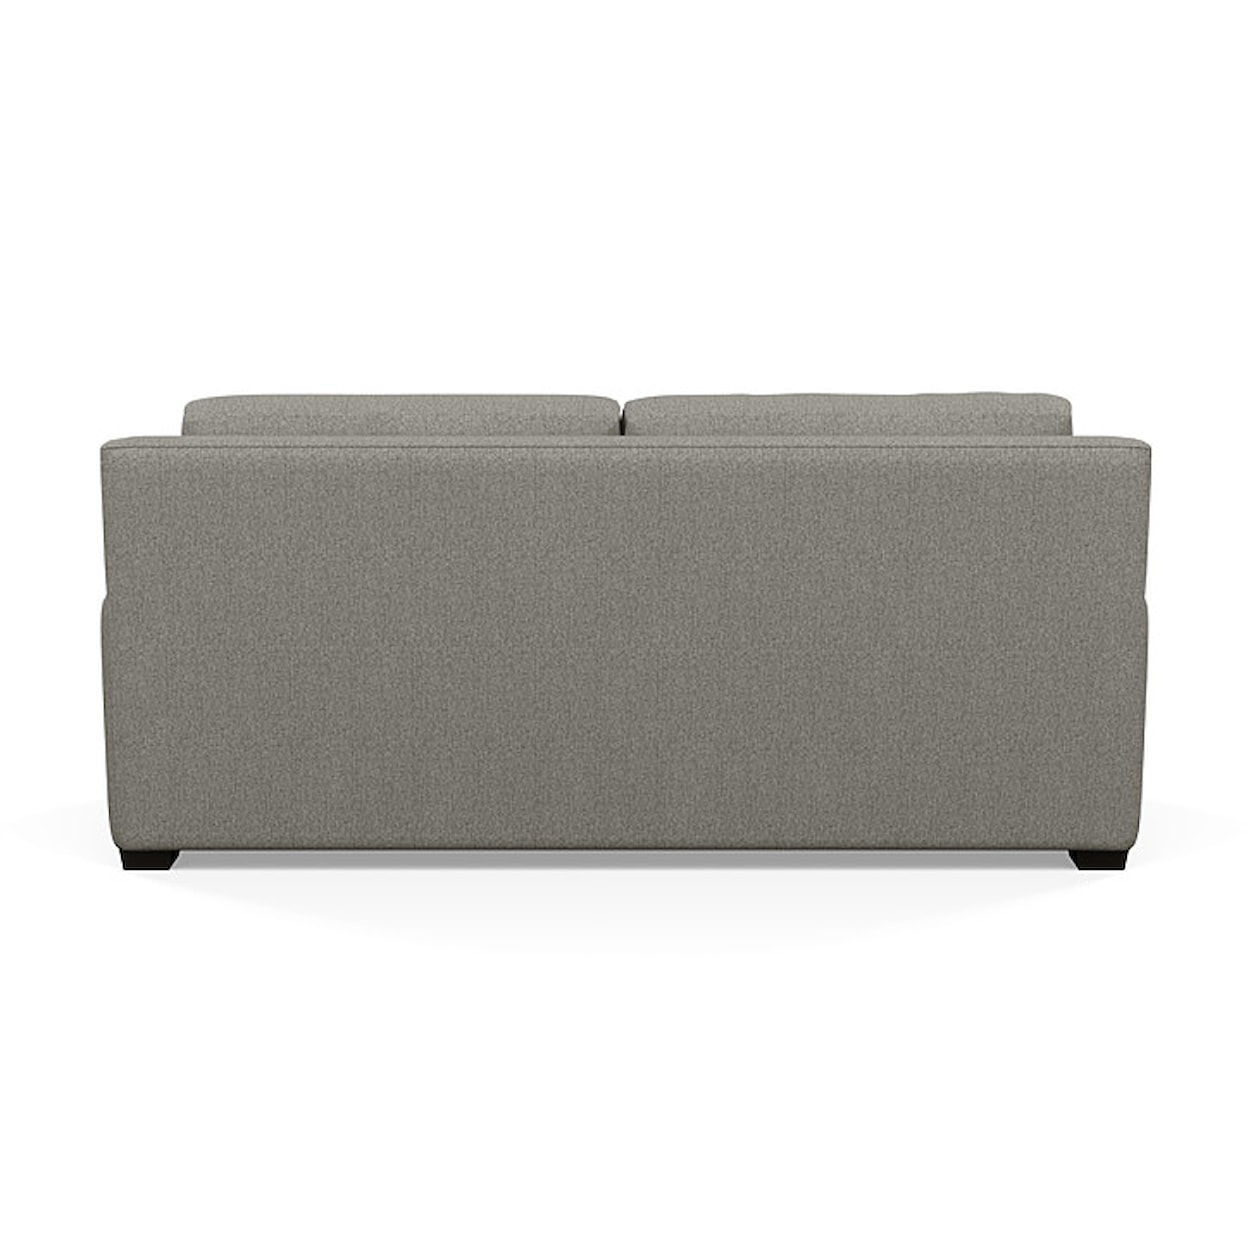 American Leather Lyons Queen Sofabed